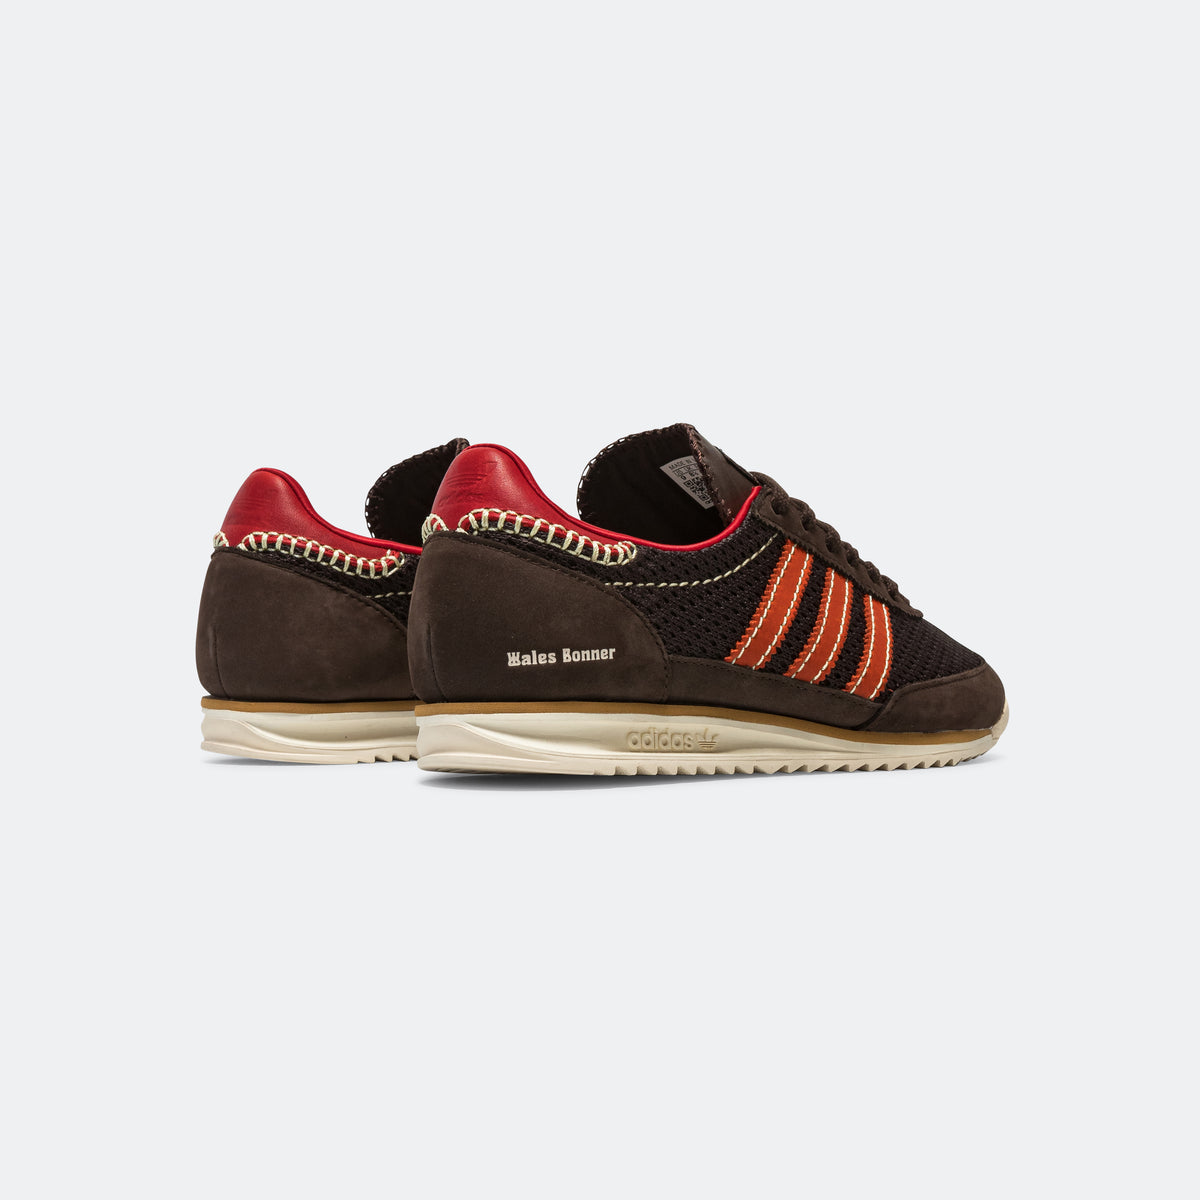 animation blotte bronze Adidas SL72 Knit x Wales Bonner - DBROWN/CORANG-SCARLE | Up There | UP THERE